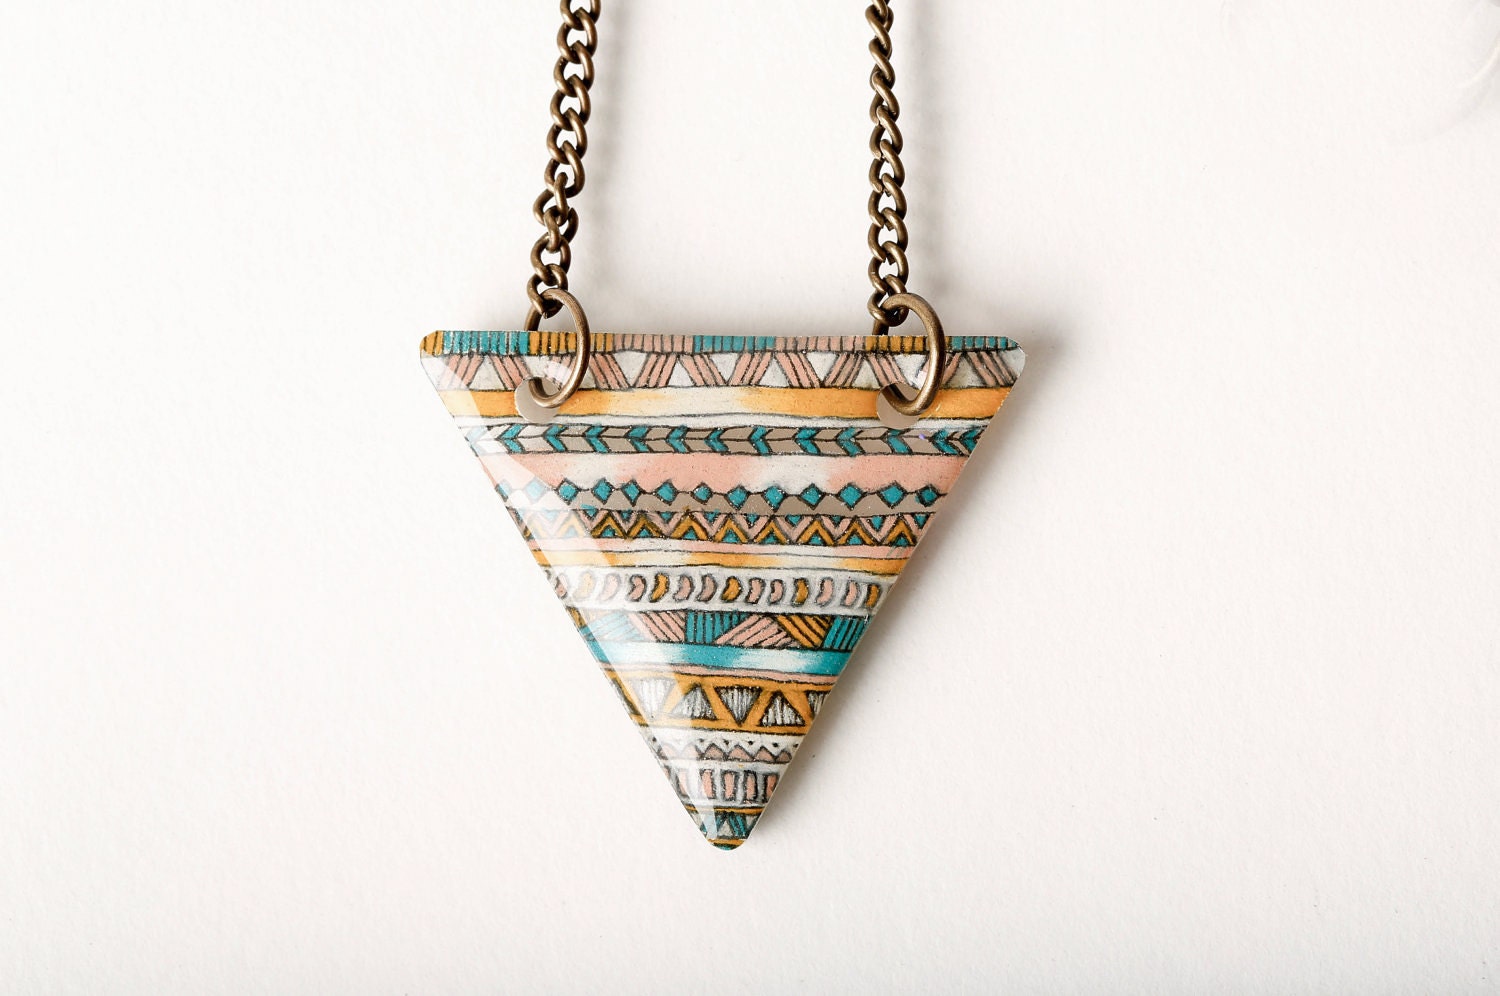 Tribal Print Necklace in Peach, Teal, and Yellow - aRainyAfternoon